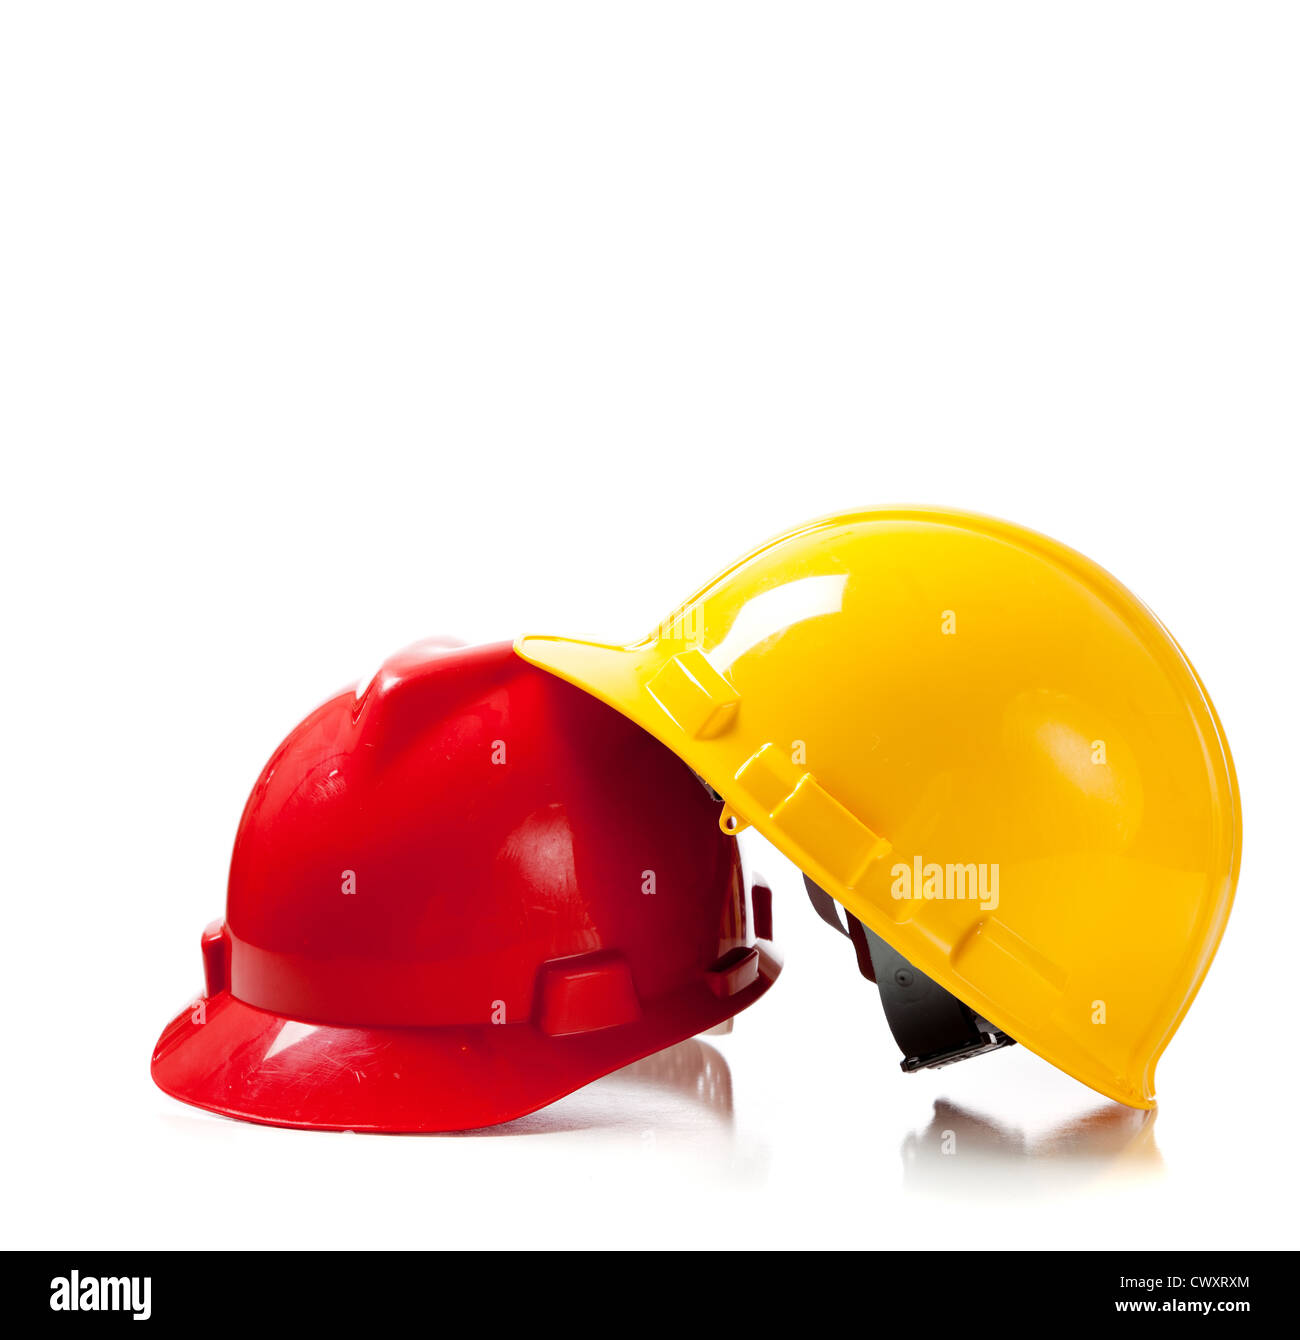 Orange and yellow hardhat on a white background with copy space Stock Photo